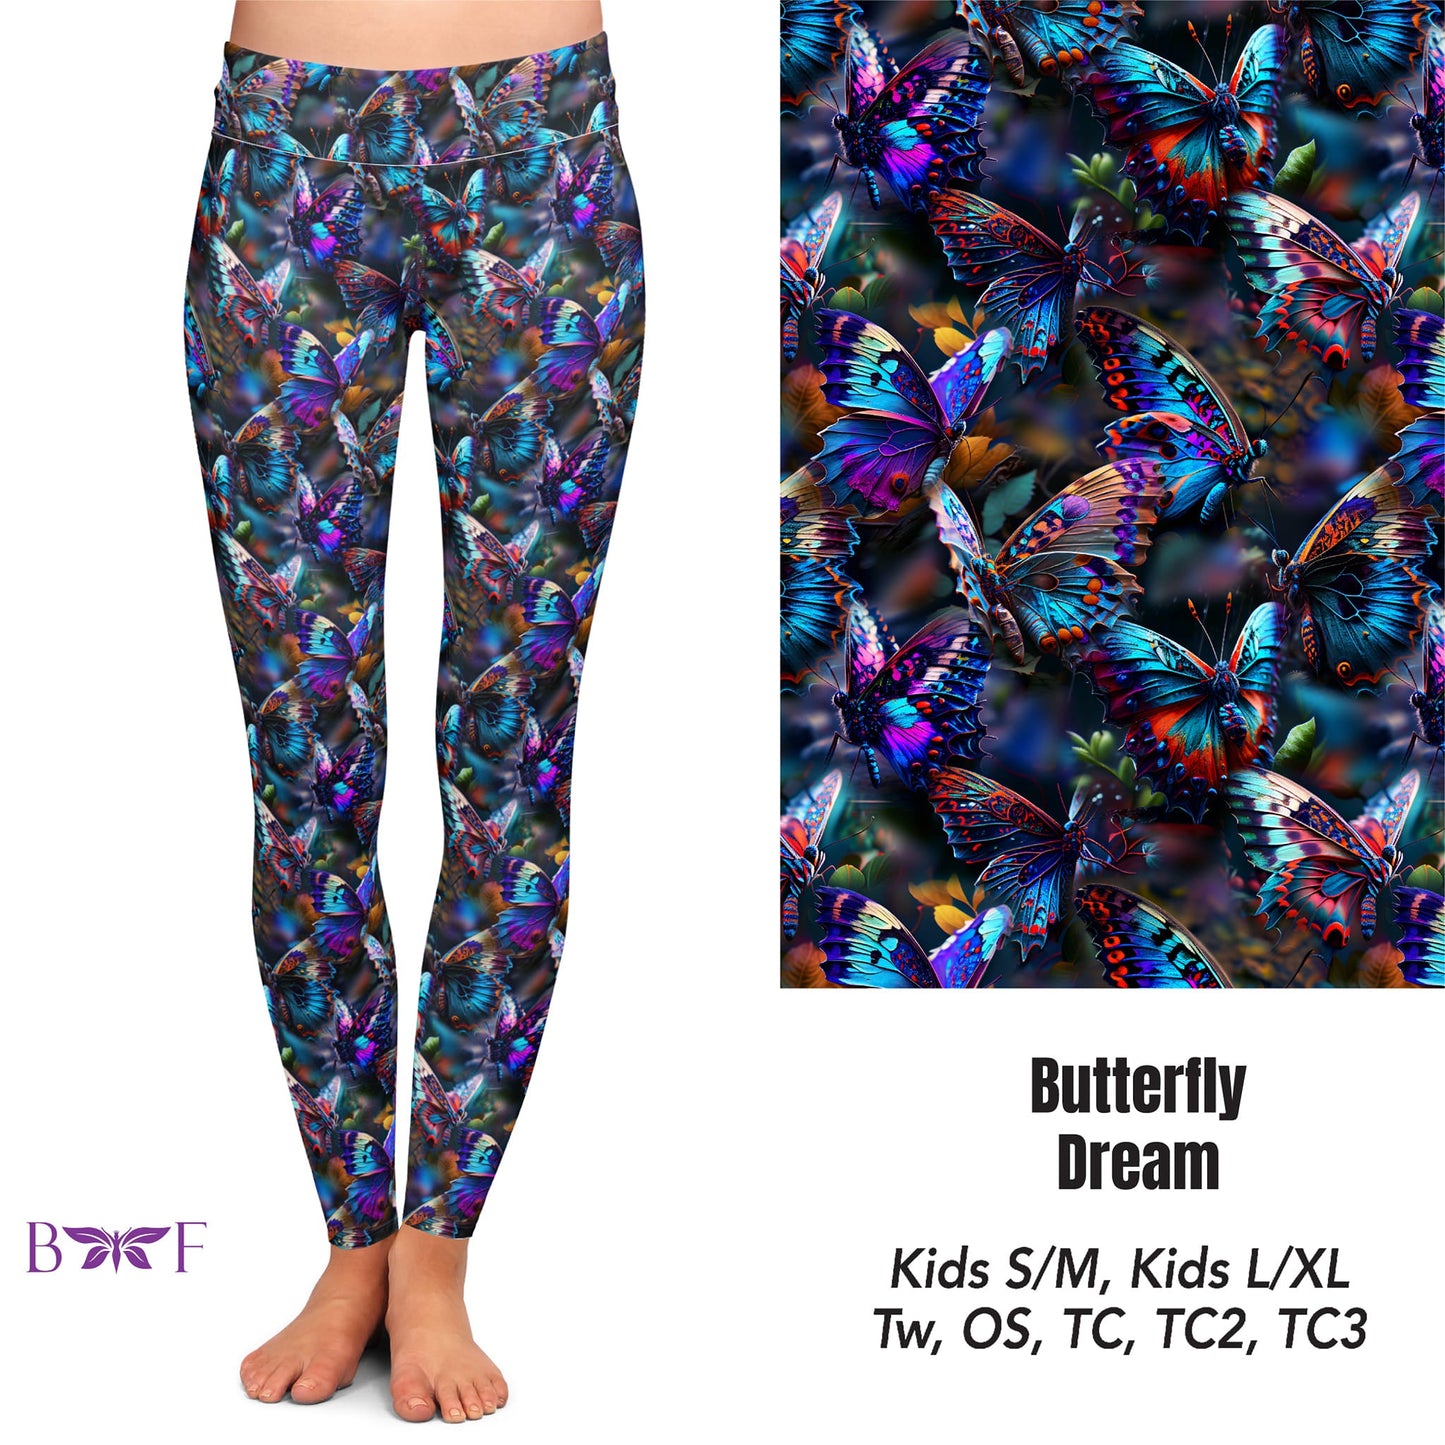 Butterfly Dream Capris with pockets